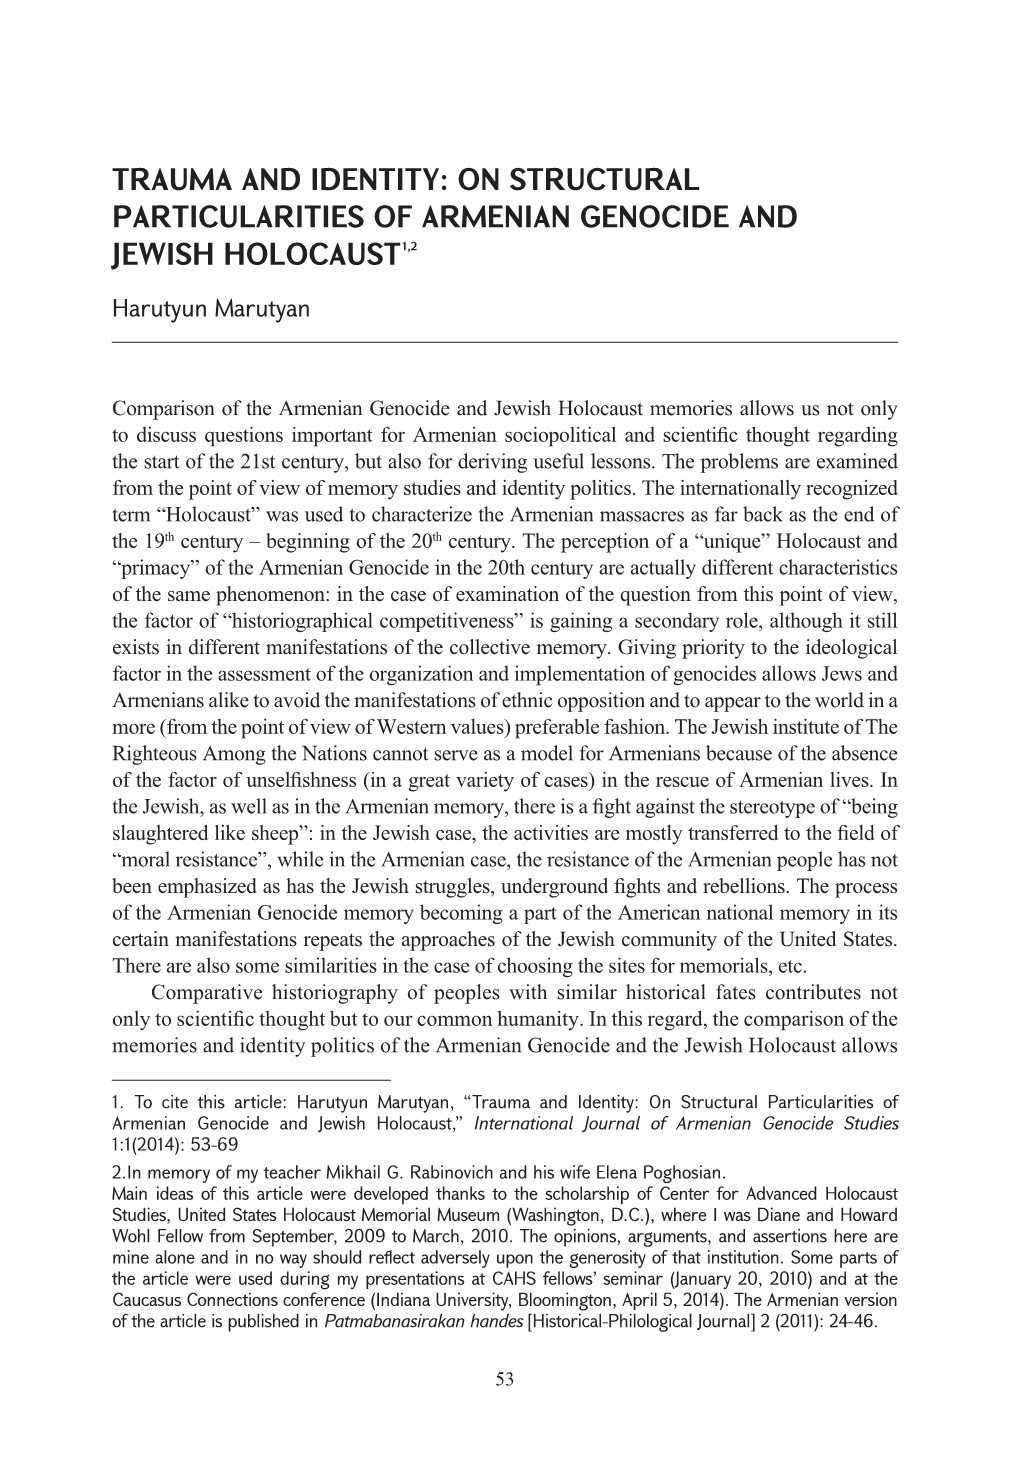 On Structural Particularities of Armenian Genocide and Jewish Holocaust1,2